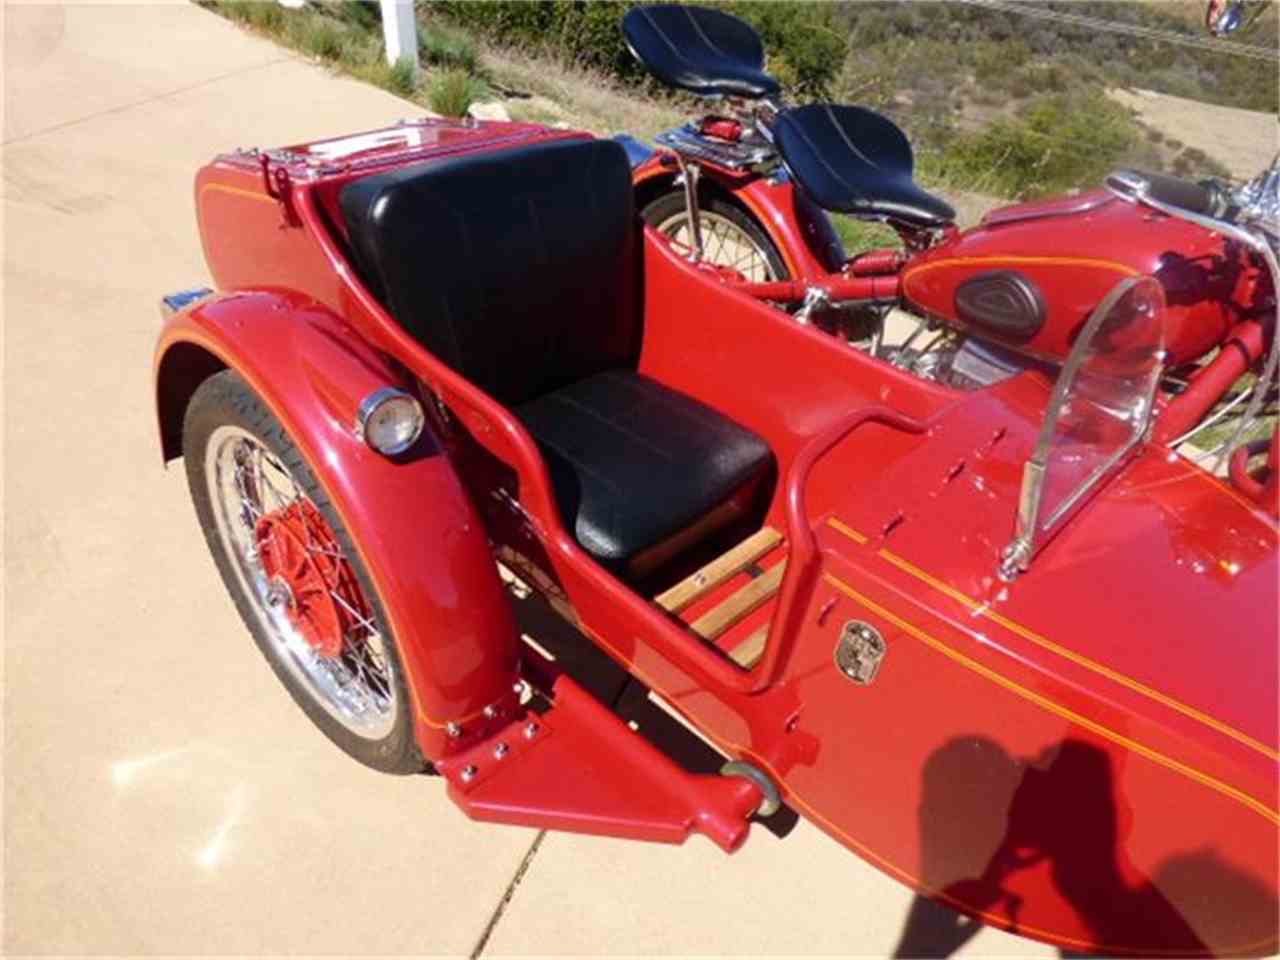 vintage motorcyles, Three-wheelers are popular, but vintage bikes with sidecars are cool, ClassicCars.com Journal